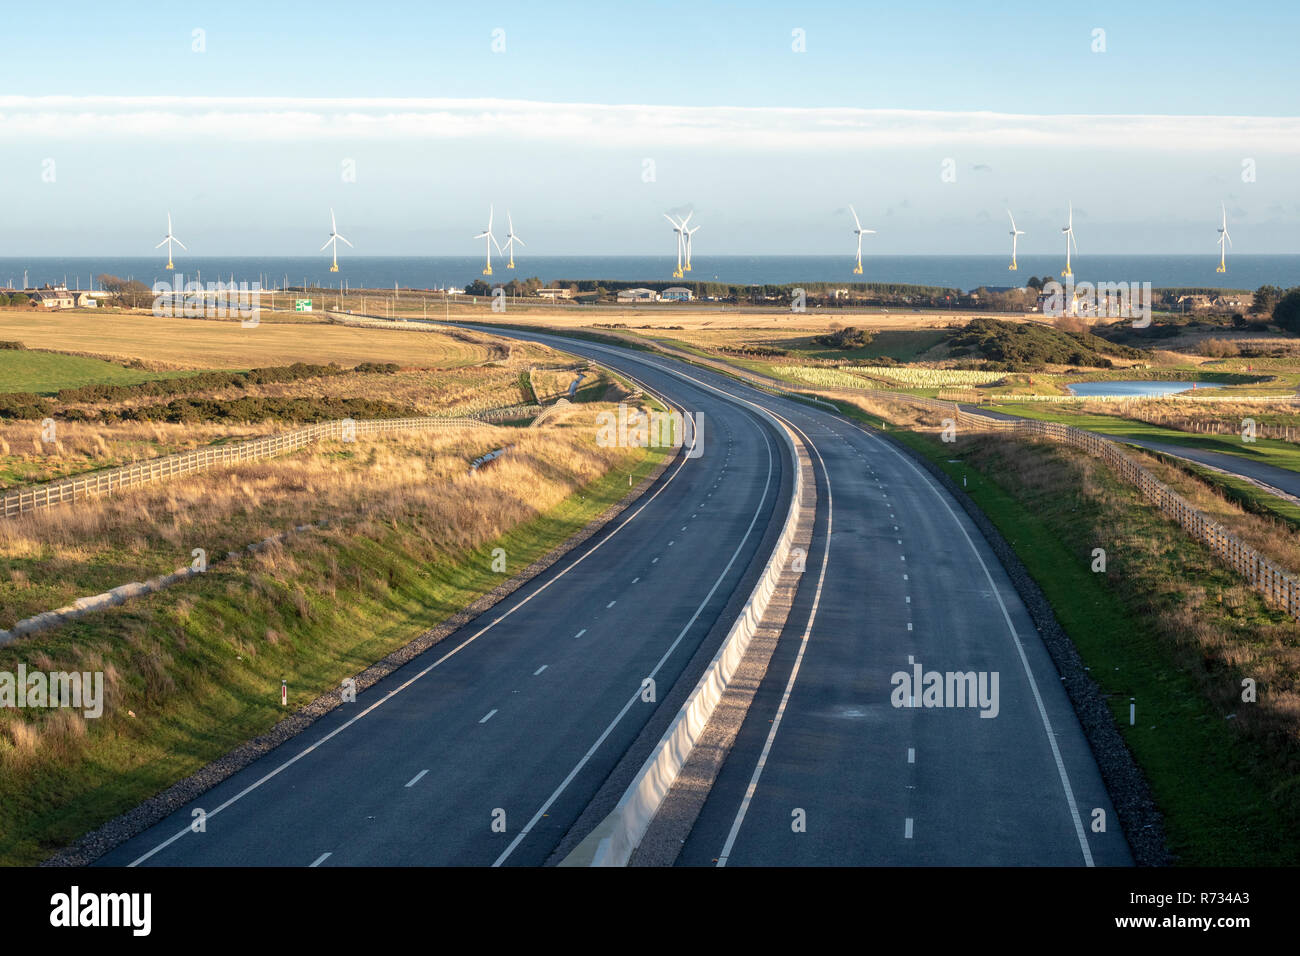 View of the new Aberdeen bypass road looking toward offshore wind farm Stock Photo